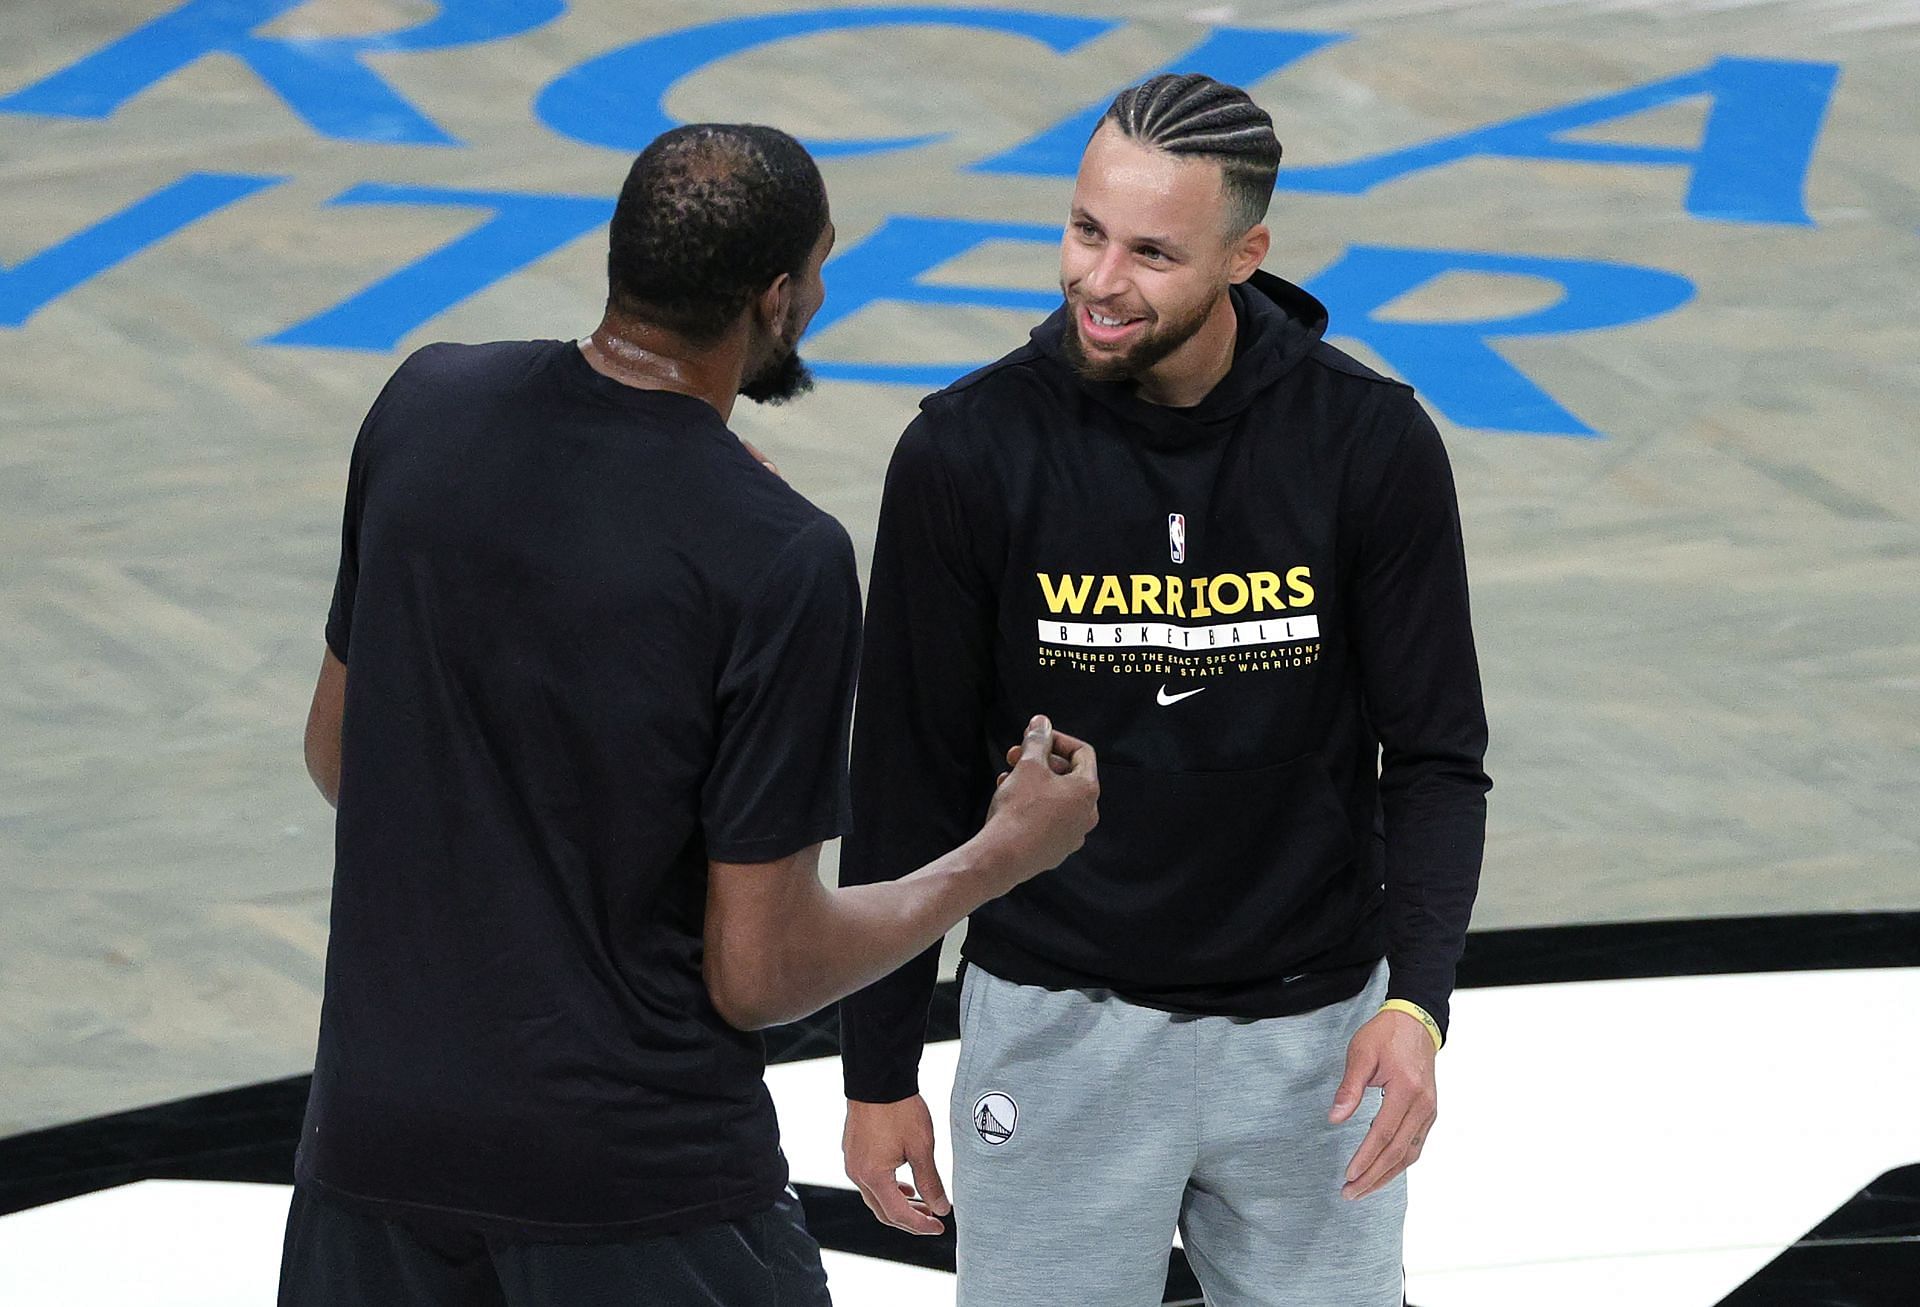 Stephen Curry of the Golden State Warriors with his former teammate Kevin Durant